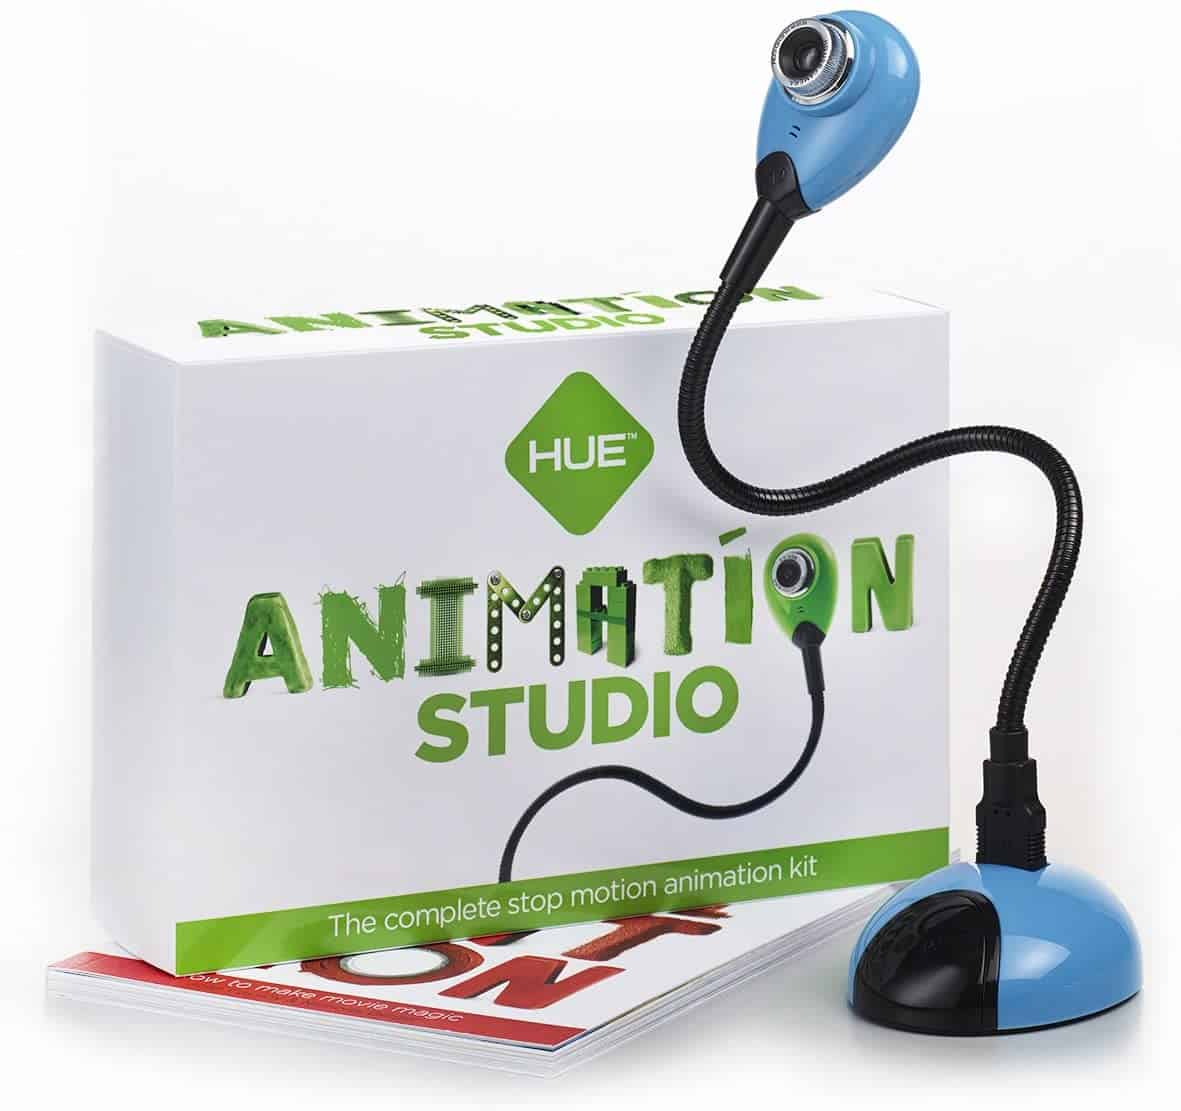 Best claymation software kit for Windows- HUE Animation Studio